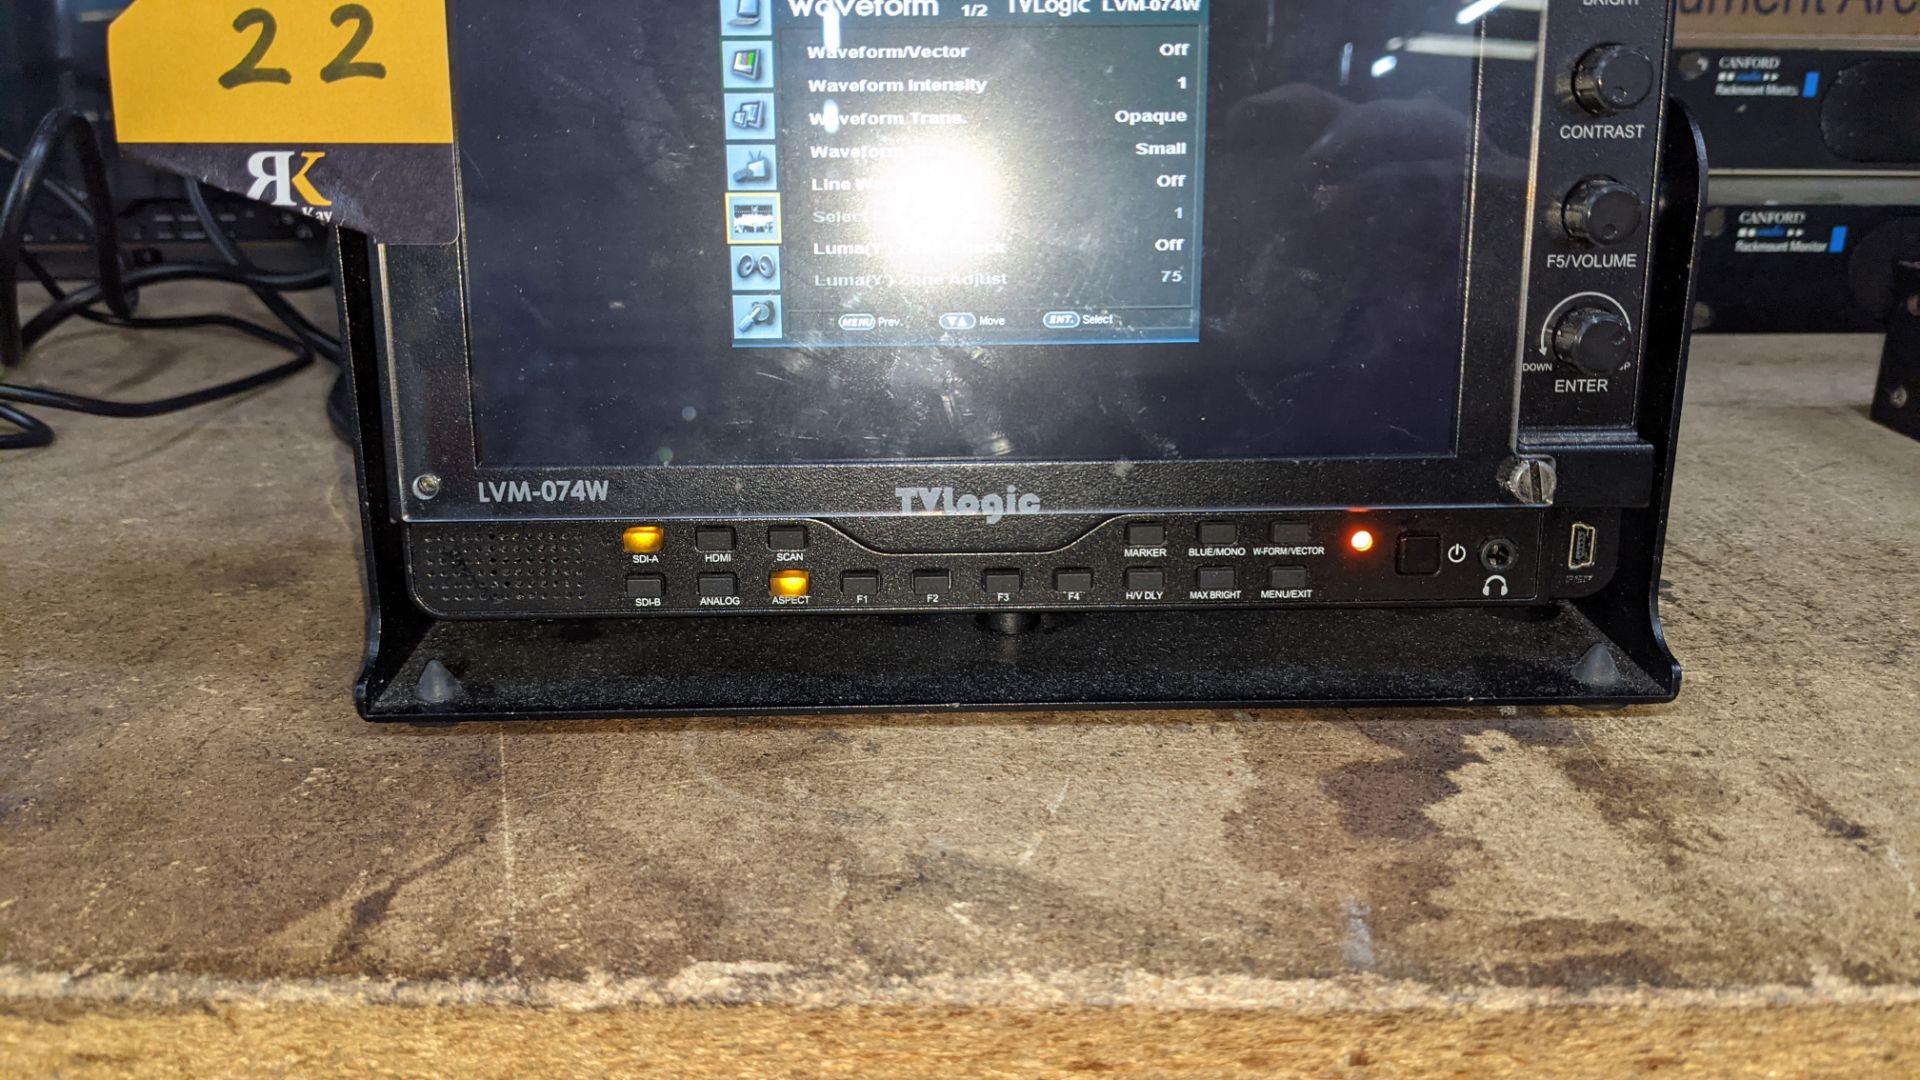 TVLogic multi format LCD monitor model LVM-074W, including hinged bracket & power supply - Image 8 of 12